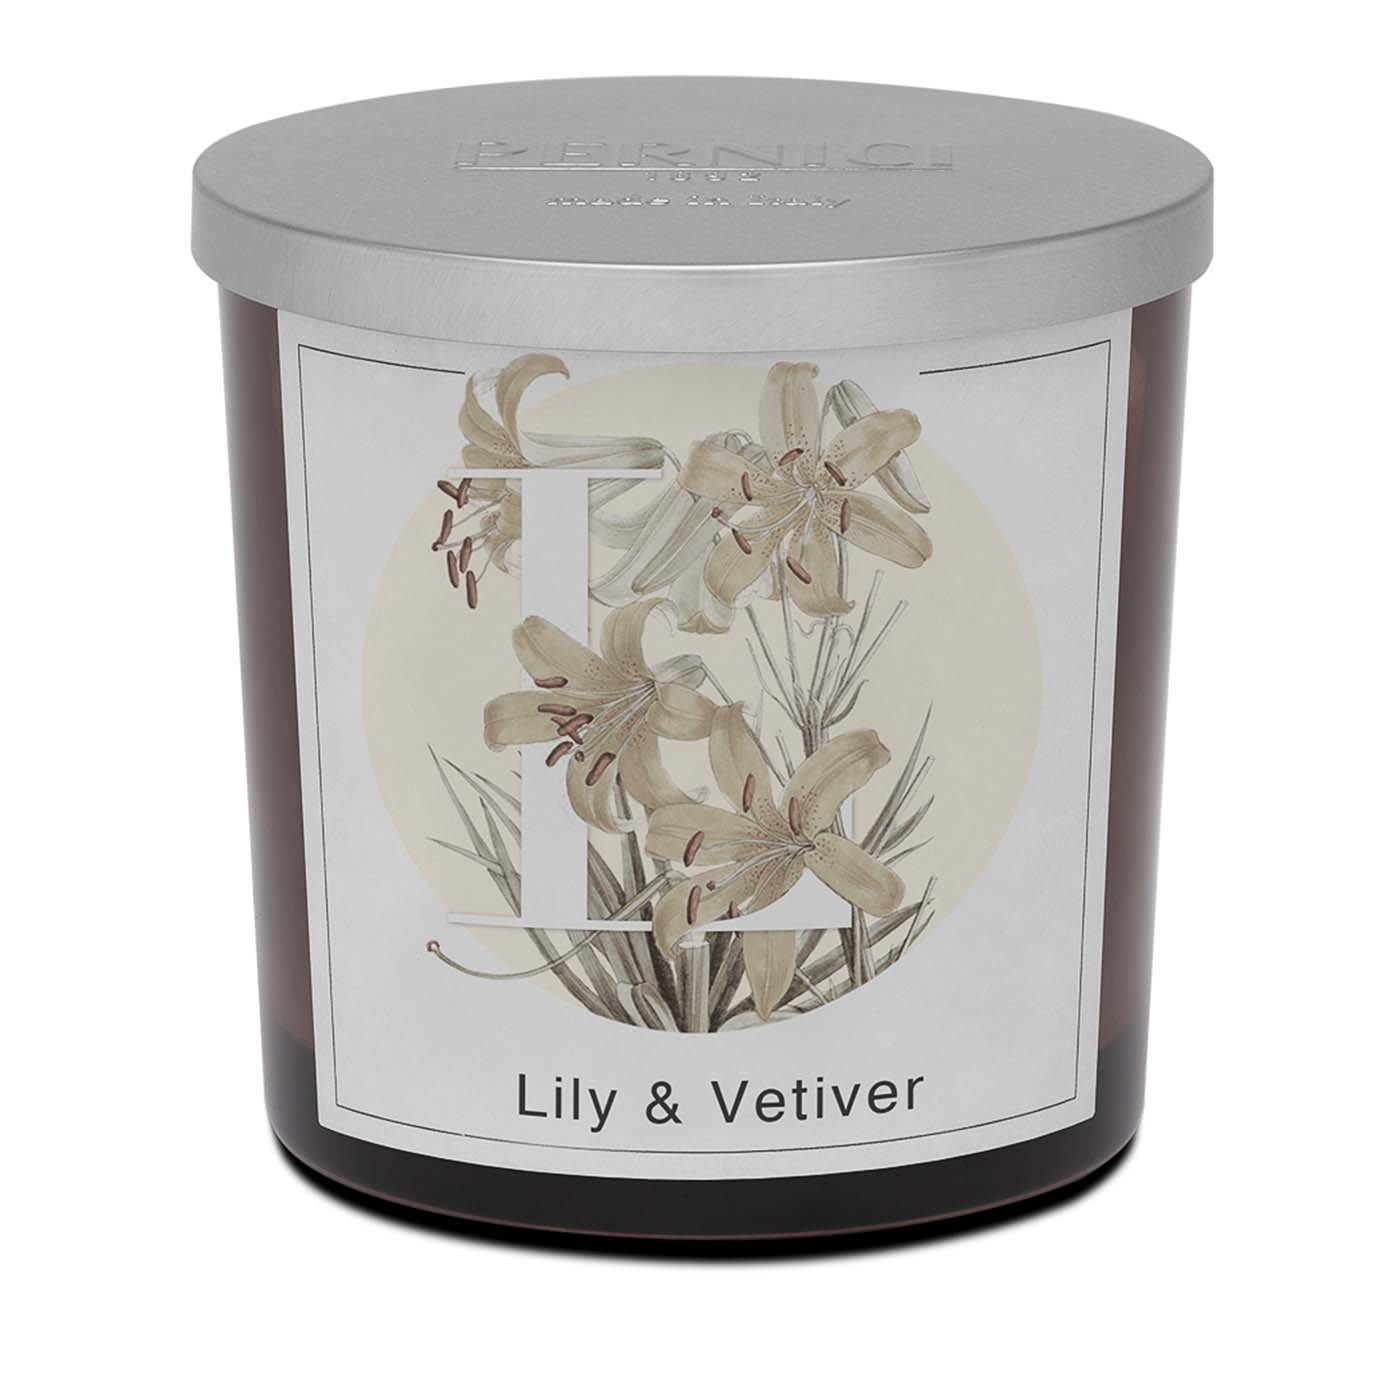 Set of 2 Lily and Vetiver Scented Candle in Glass - Cereria Pernici 1892